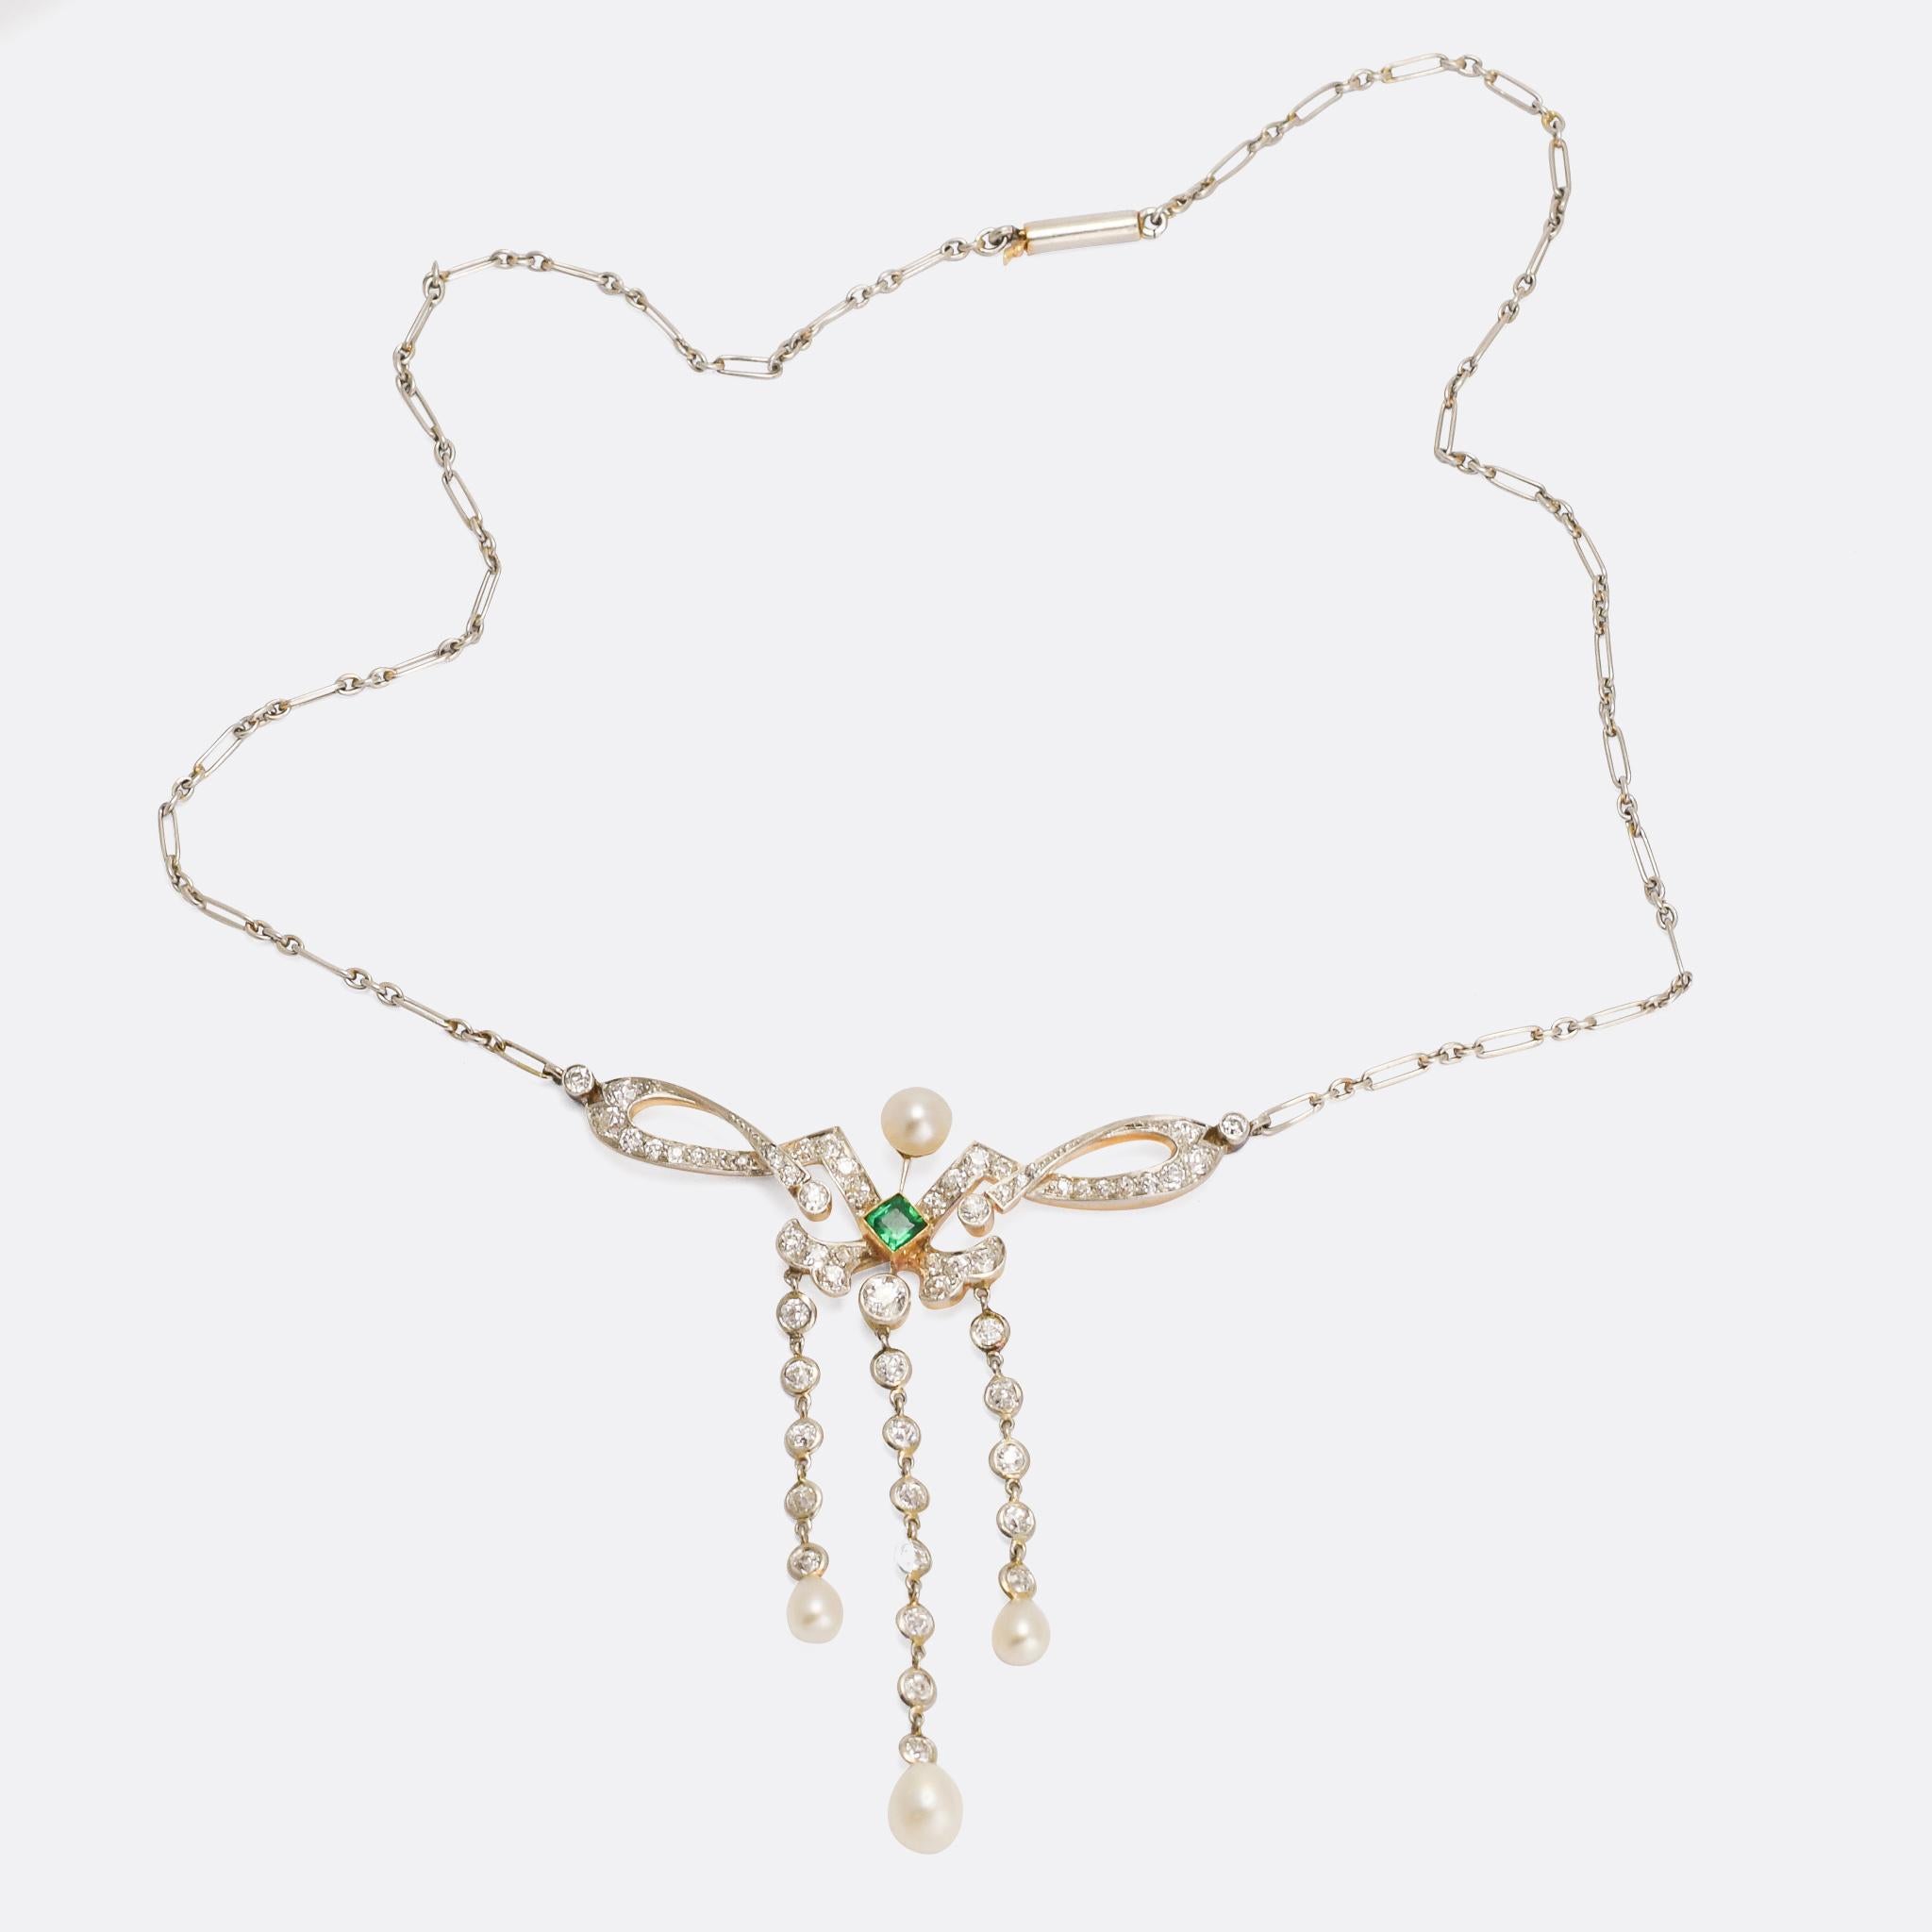 A showstopping example of Edwardian jewellery at its finest. This stunning necklace is made by the esteemed Hancocks & Co. of London, set with over two carats of old cut diamonds, four natural pearls, and a vibrant emerald centrepiece it's both